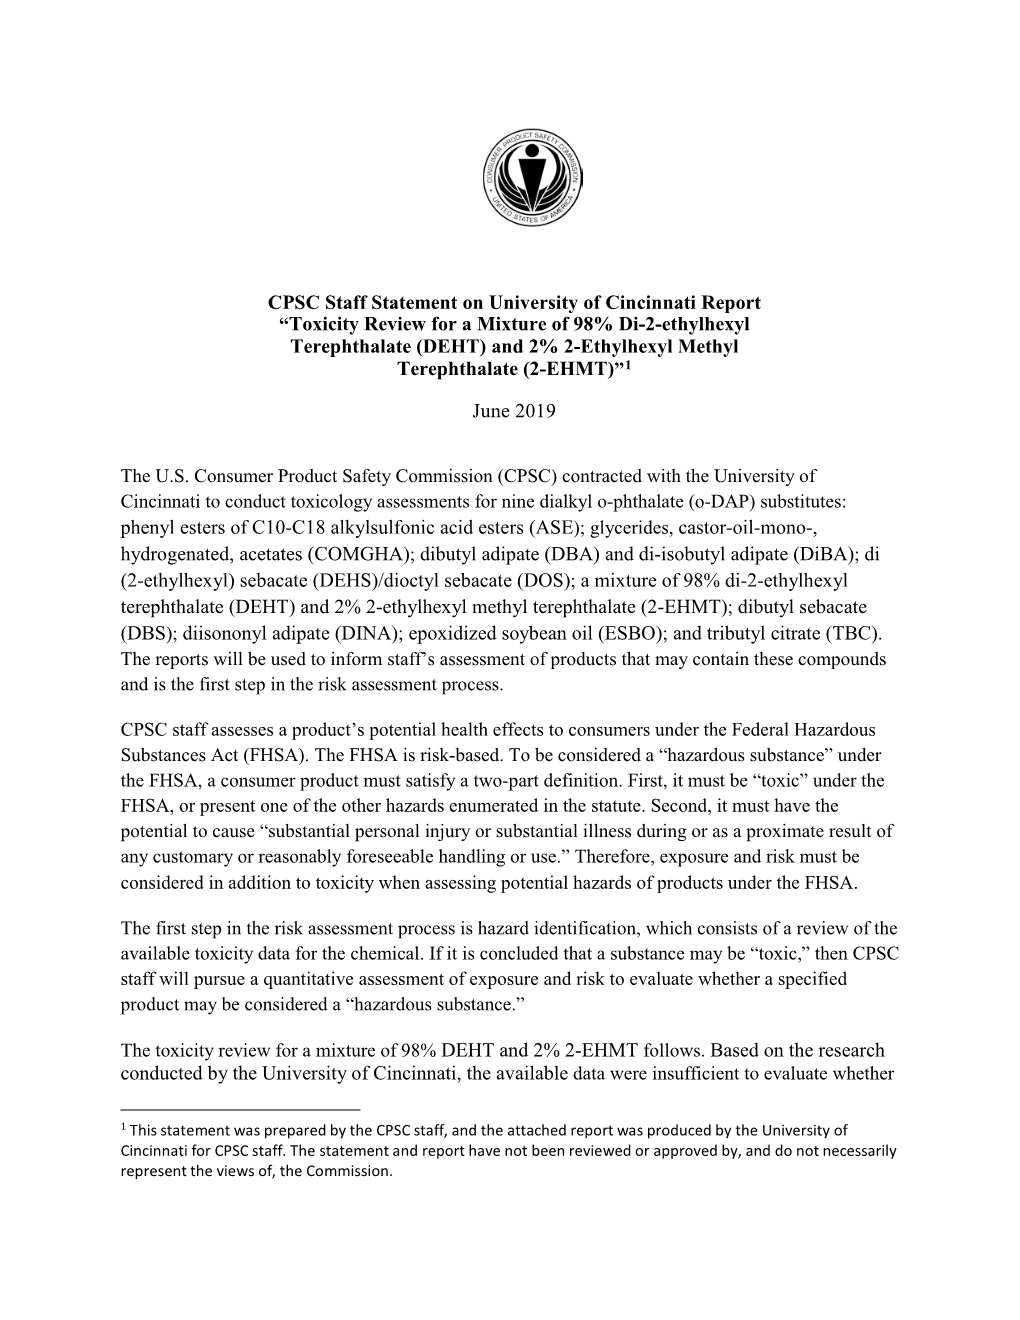 CPSC Staff Statement on University of Cincinnati Report “Toxicity Review